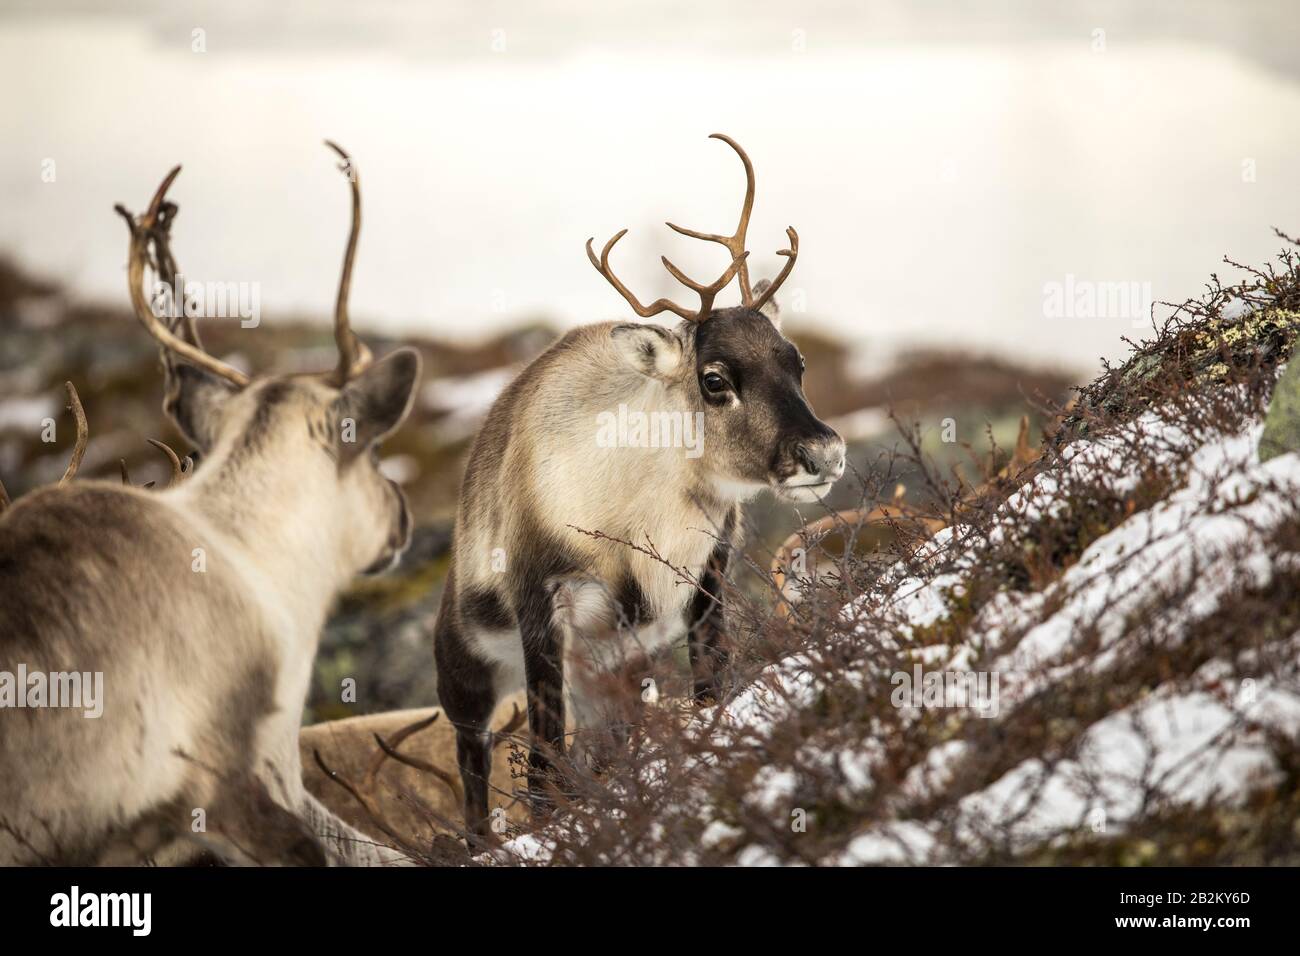 Reindeer in Spitsbergen, Svalbard in beautiful surroundings. Snow and winter landscape with exotic animals, living in hash environments all year round Stock Photo